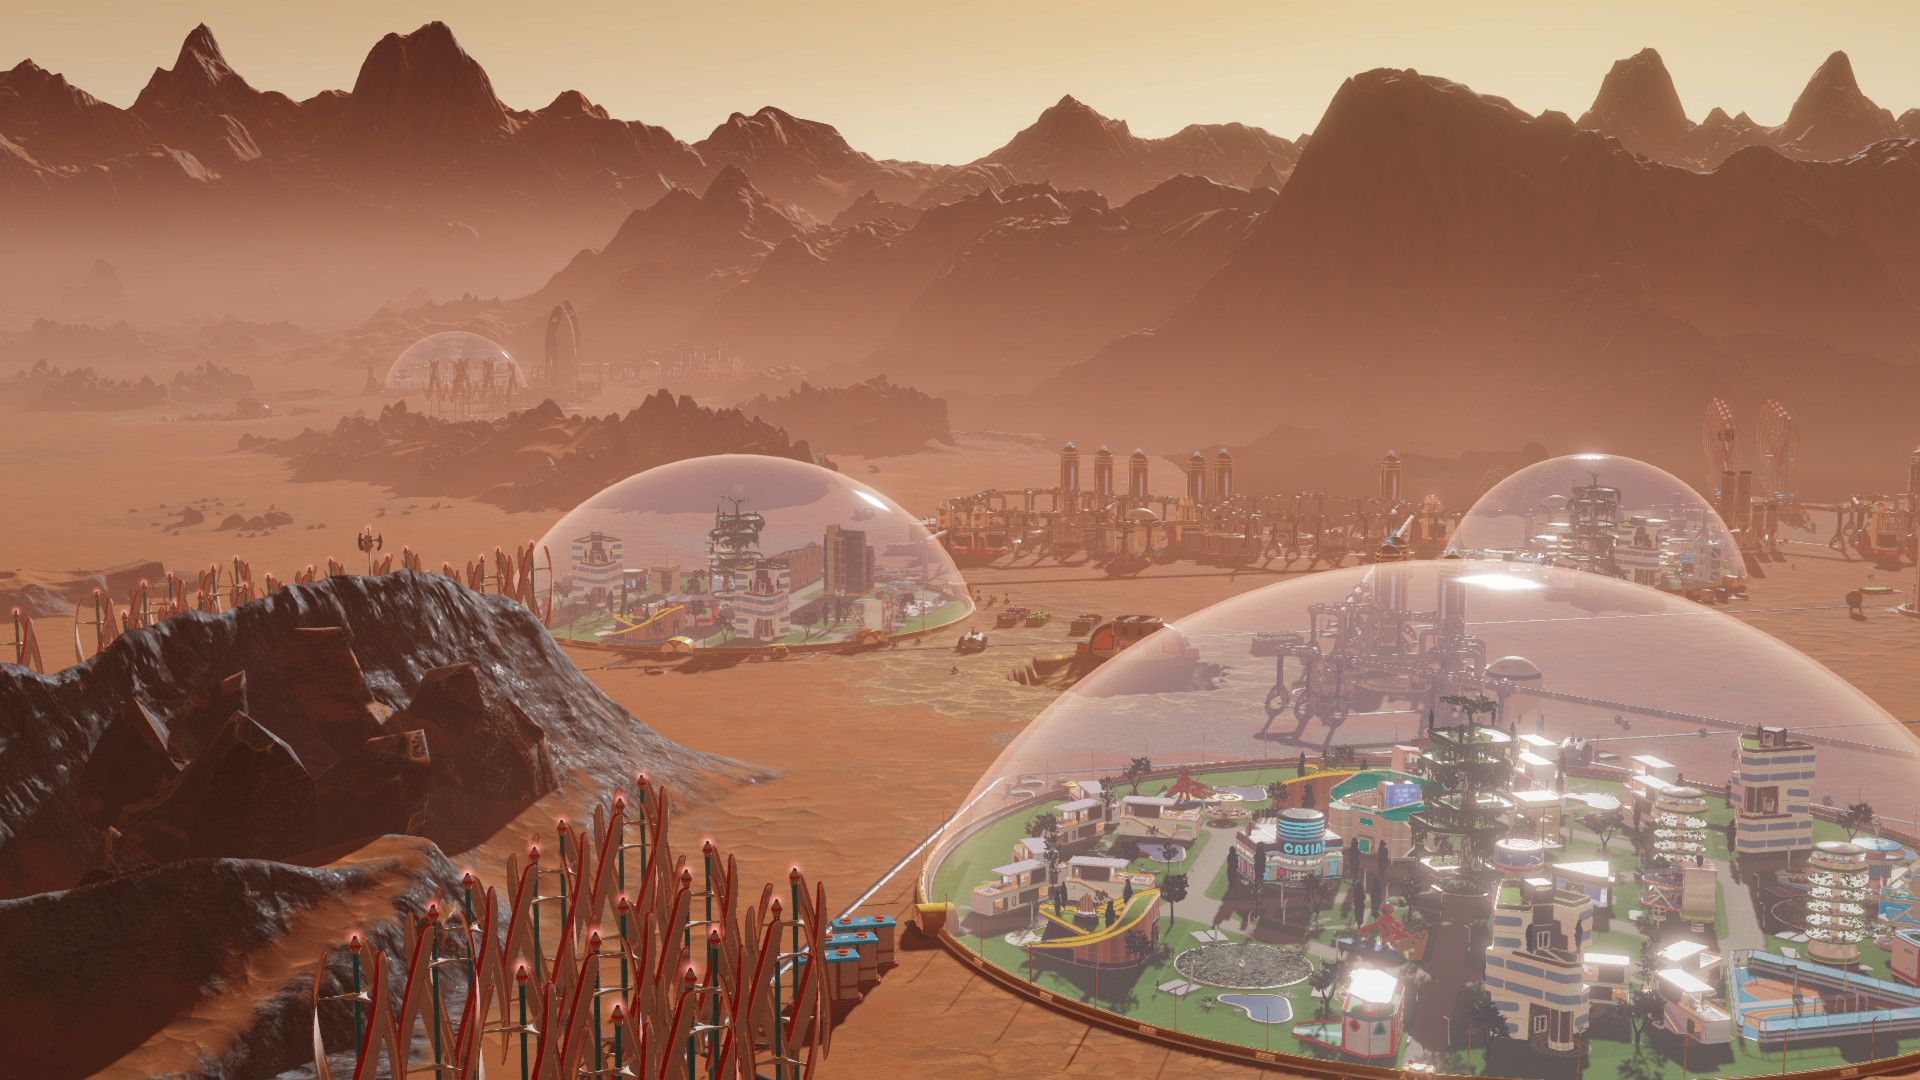 Surviving Mars Colony Mars page of awesome games! BUY THEM coz you deserve them! ;-)